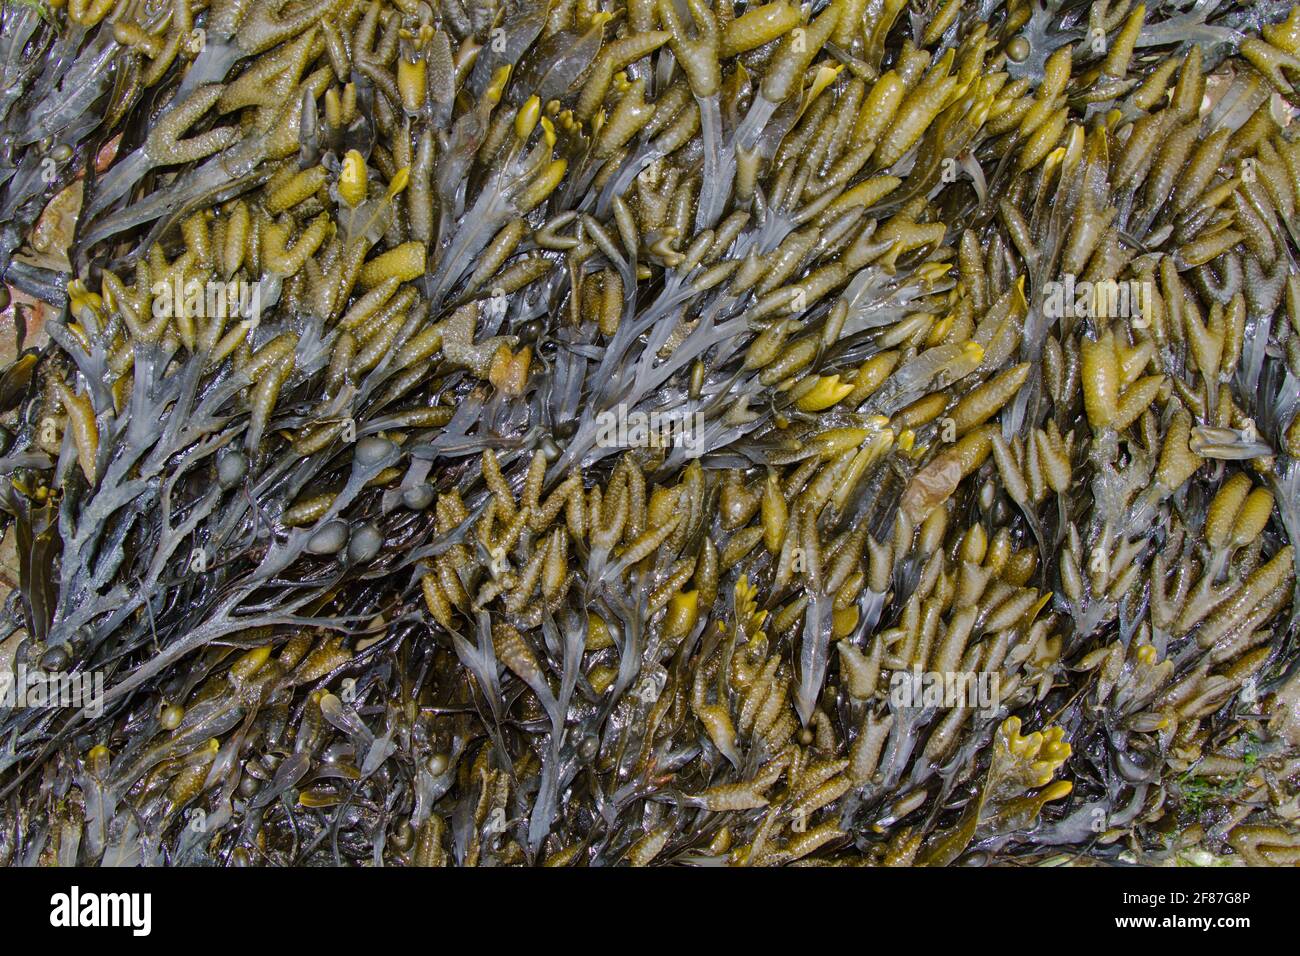 Thick layer of seaweed, Bladder Wrack, with lots of reproductive organs Stock Photo